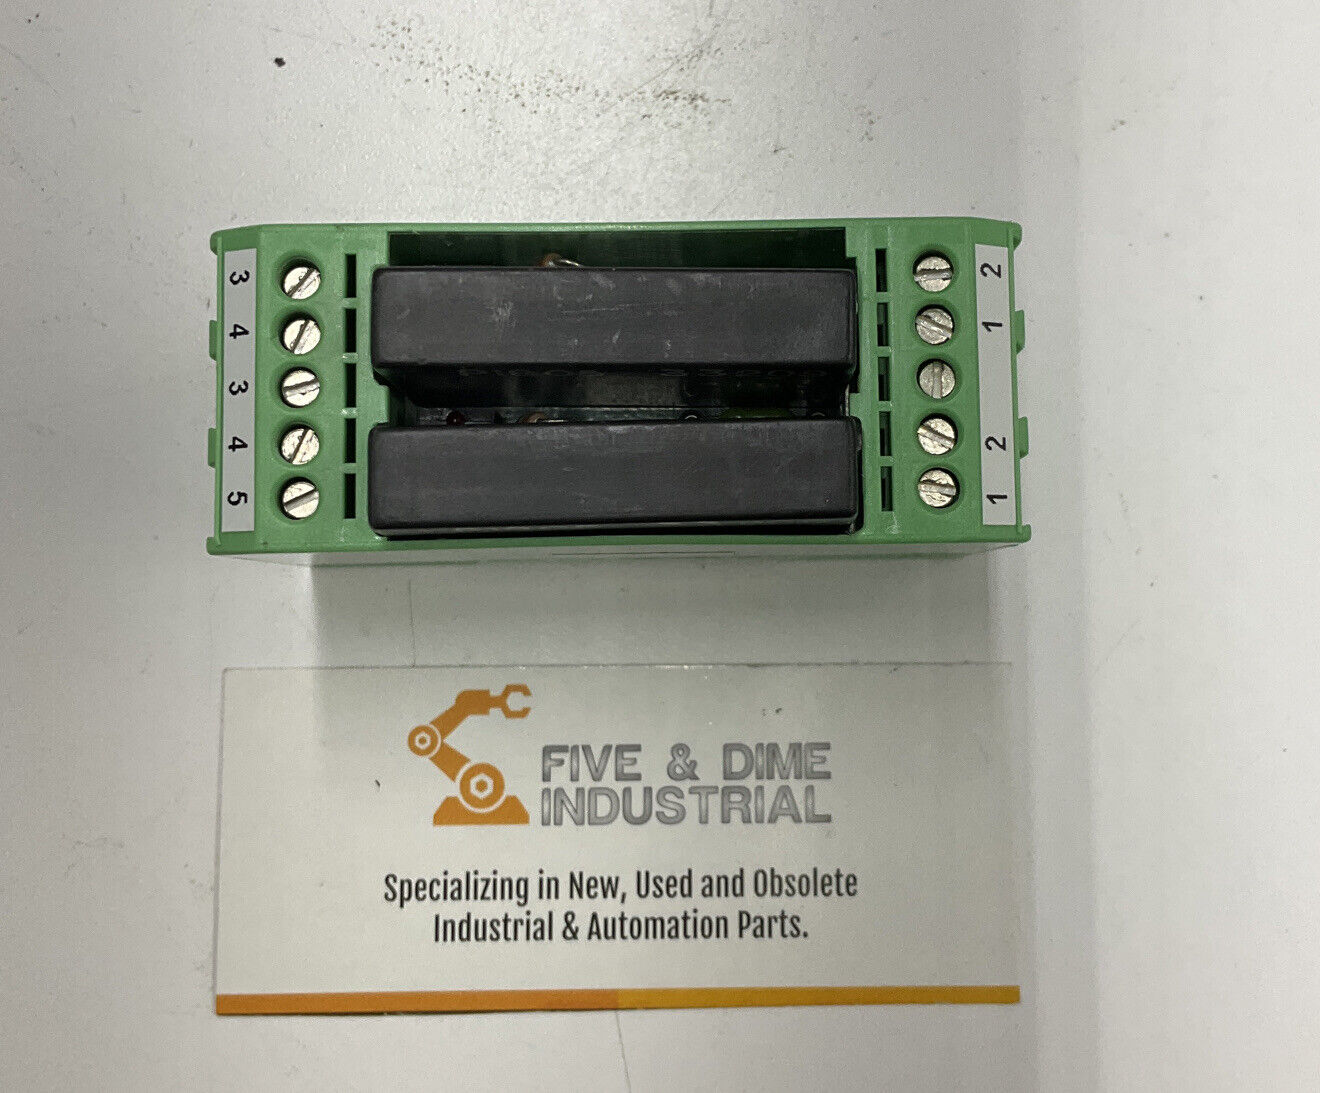 Phoenix Contact EMG 30-I/O-P Relay Base w/ Solid State Relay 2904010 (CL162)